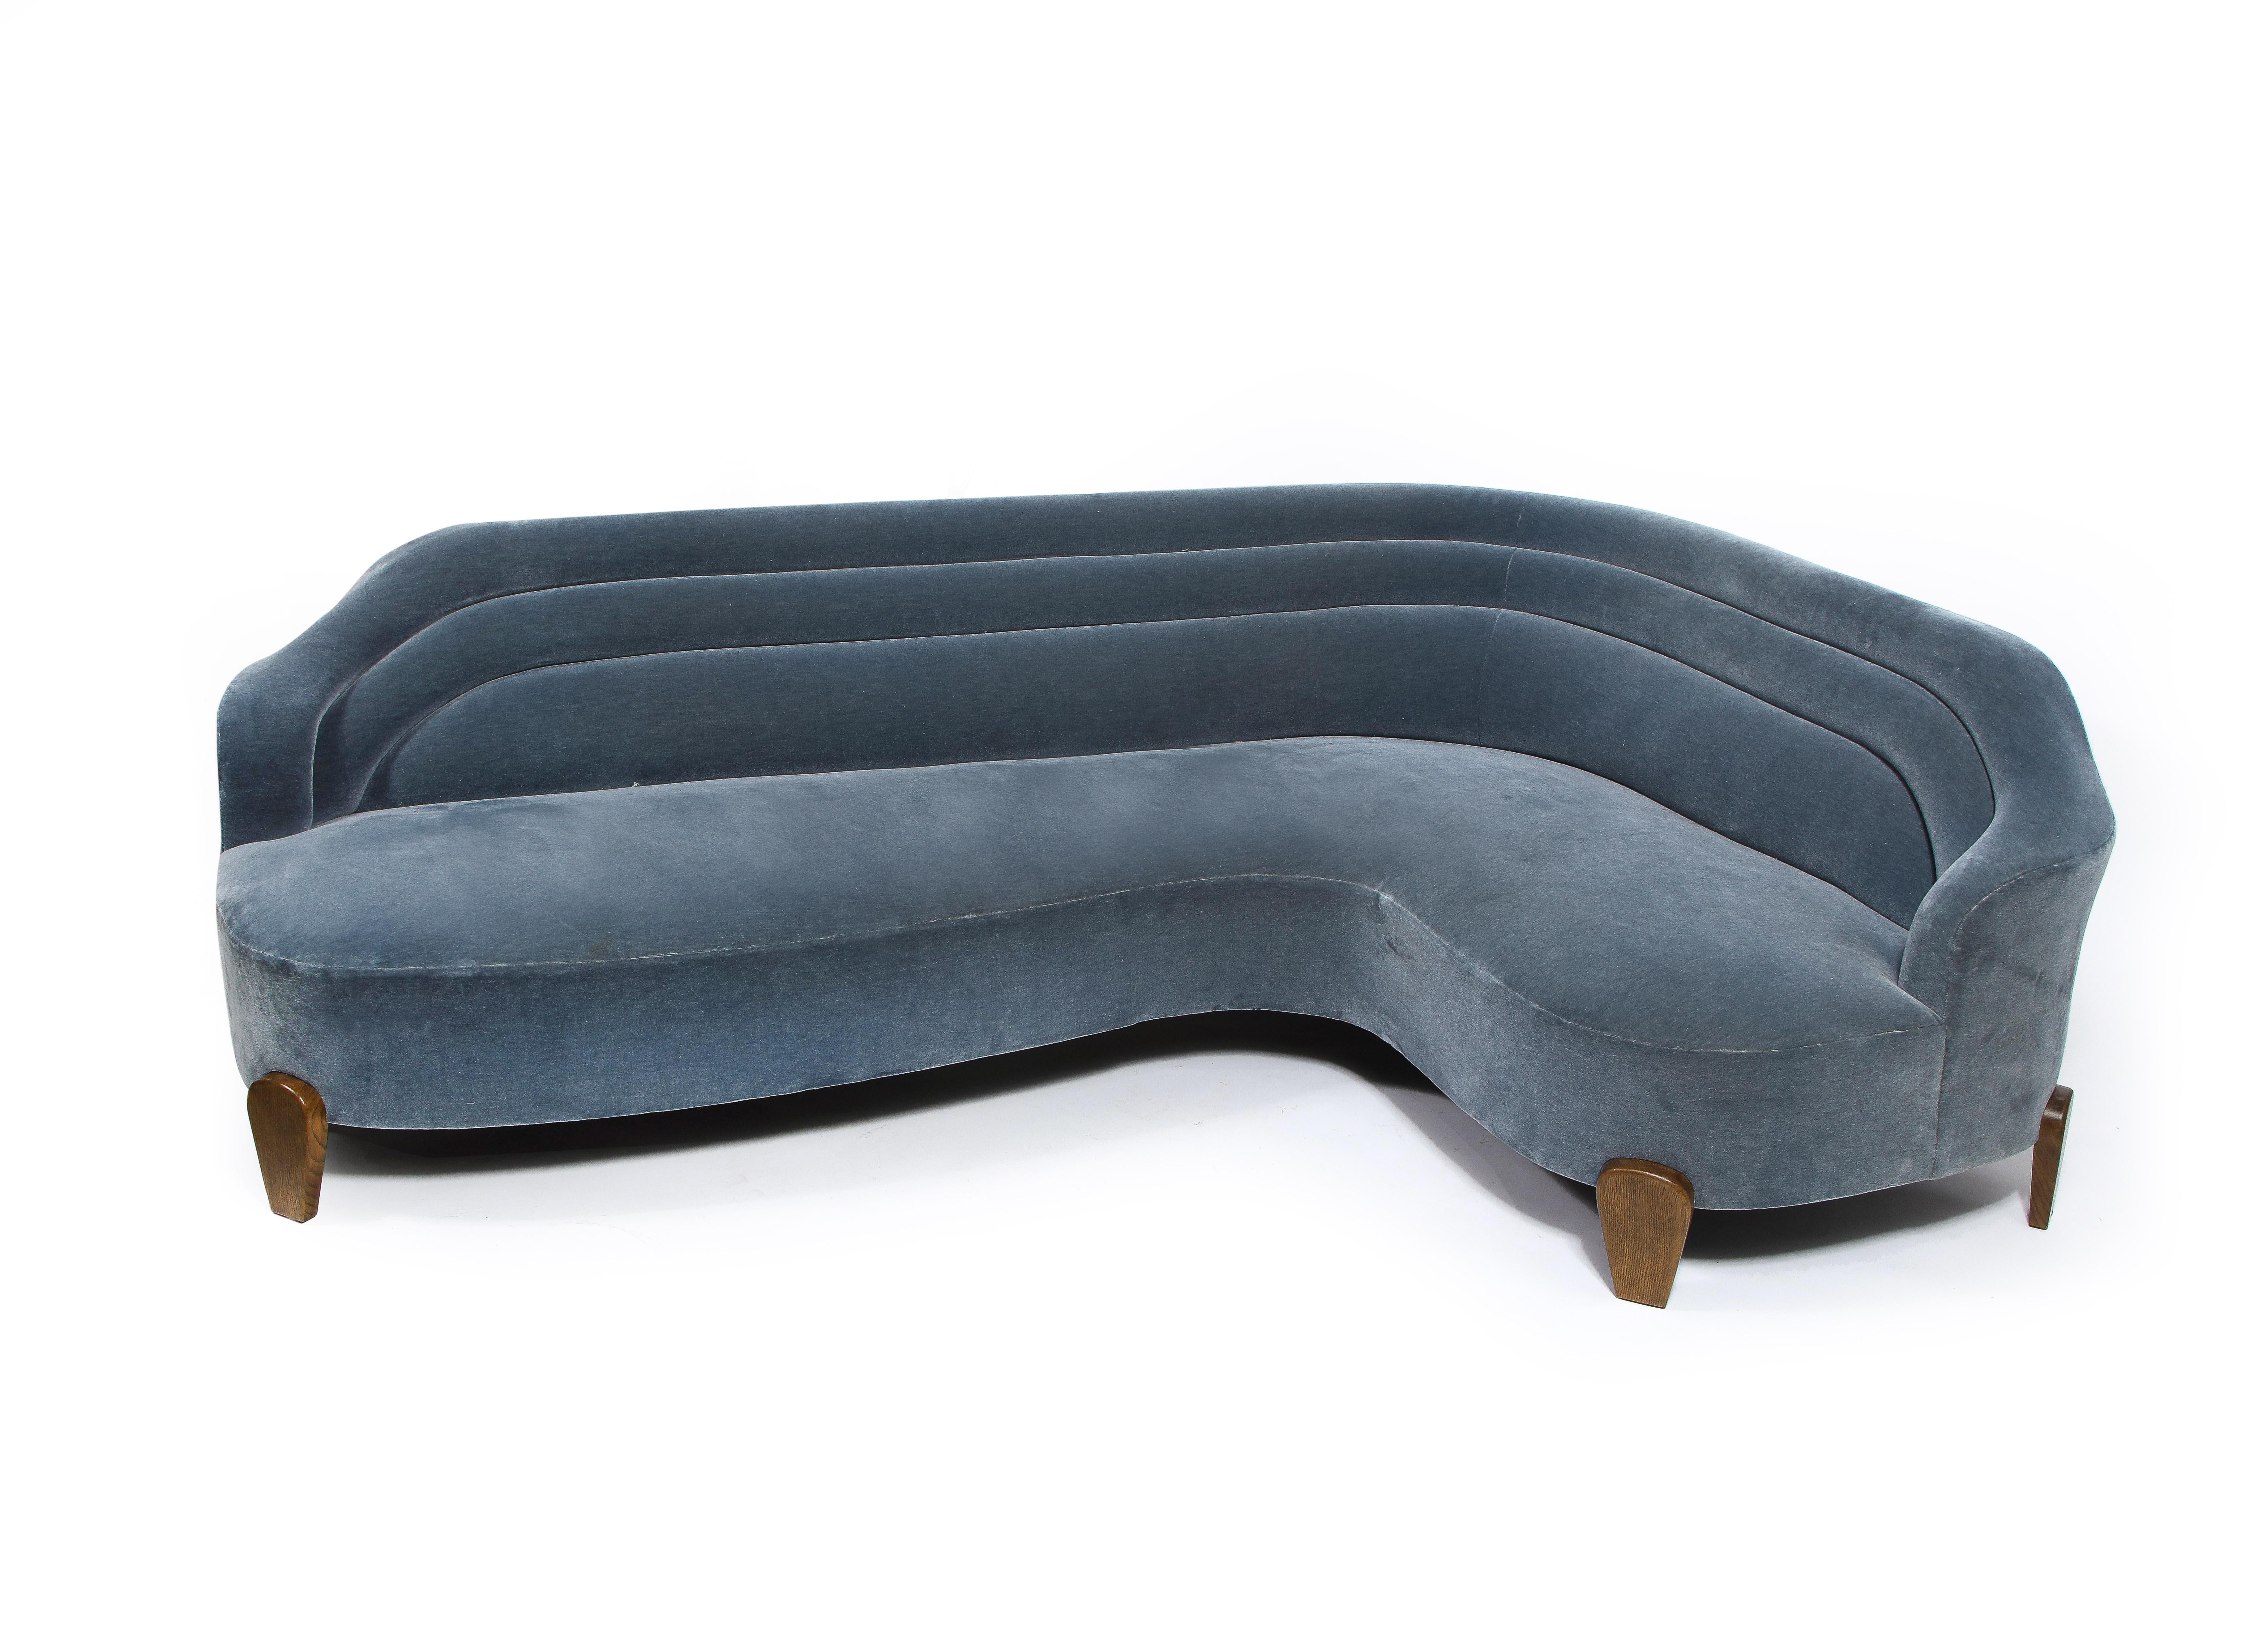 Original design by Charlie Ferrer. Inspired by the serpentine sofa forms of Kagan. Extremely comfortable.

Sofa construction in very good condition. Fabric on two panels of upholstery damaged and need to be recovered. Offered in as-is condition. 